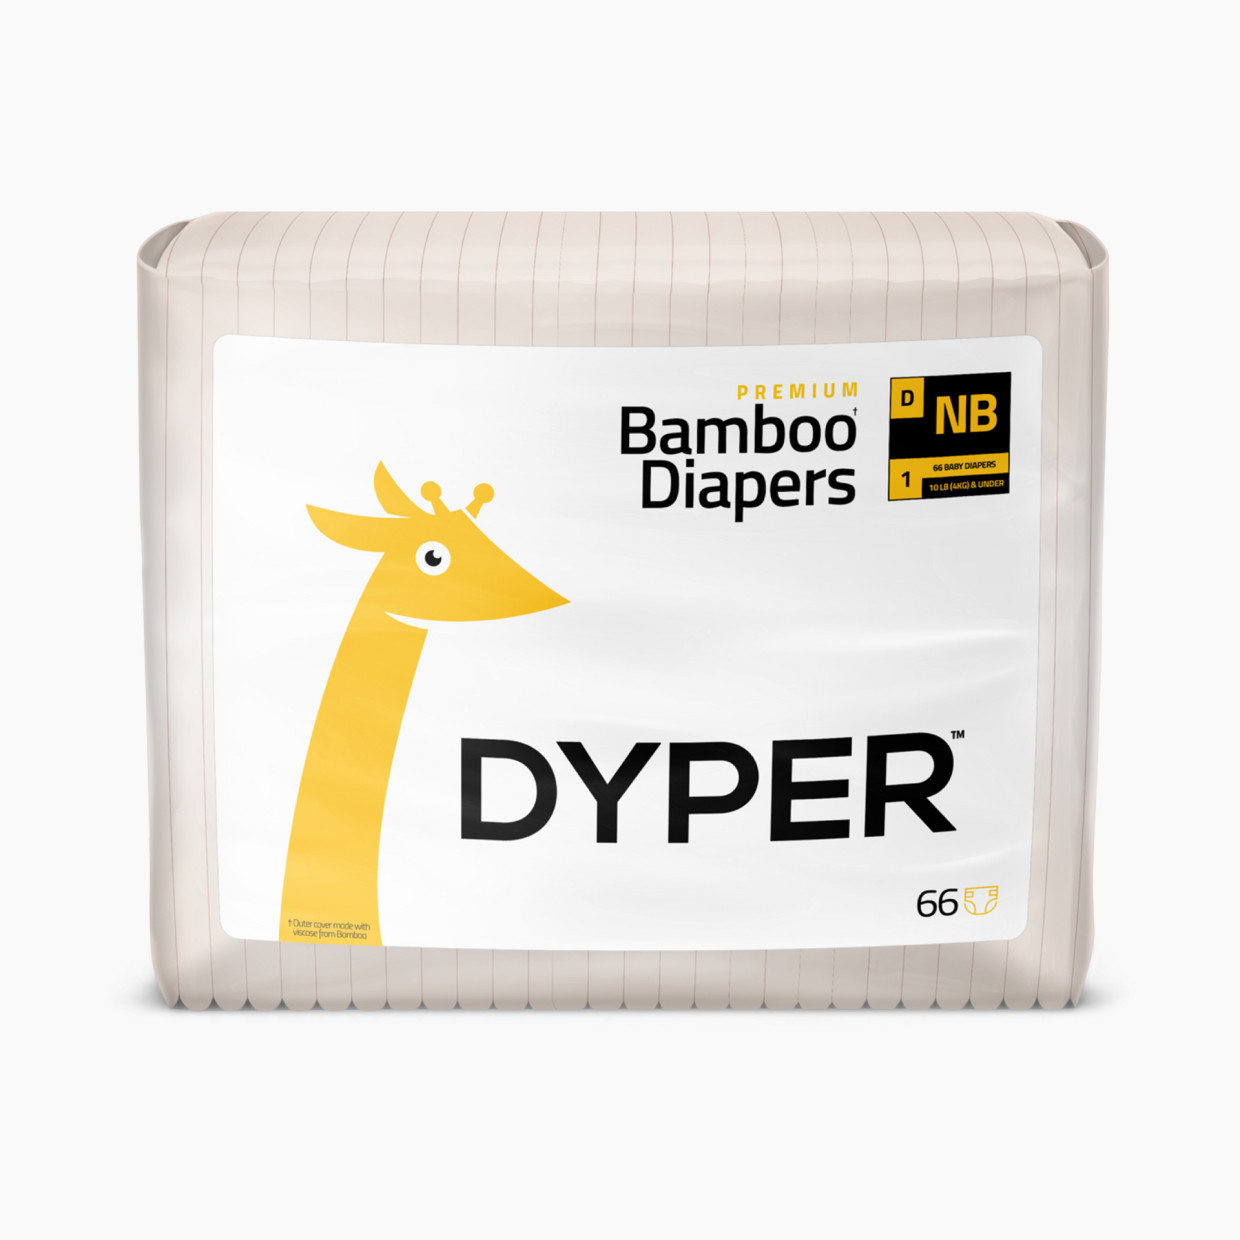 DYPER Sustainable Diapers - Newborn, 66 Count.